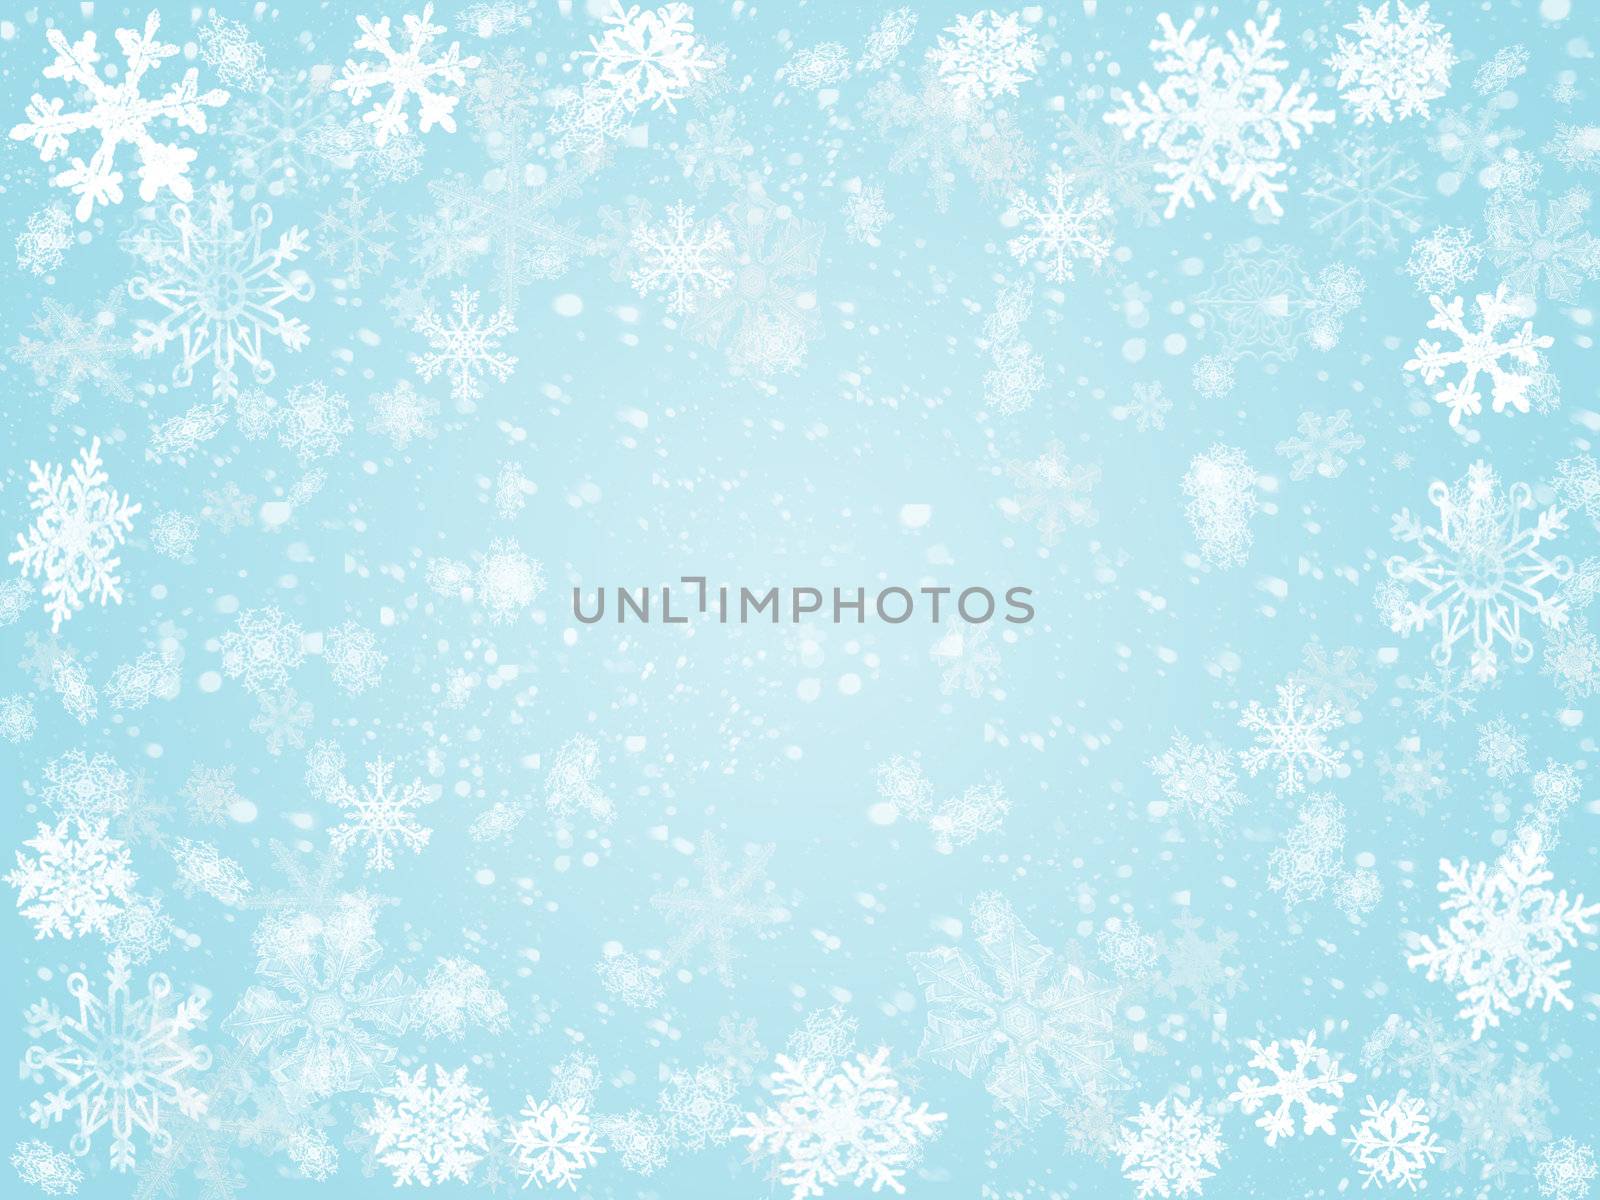 white snowflakes over light blue background with feather center